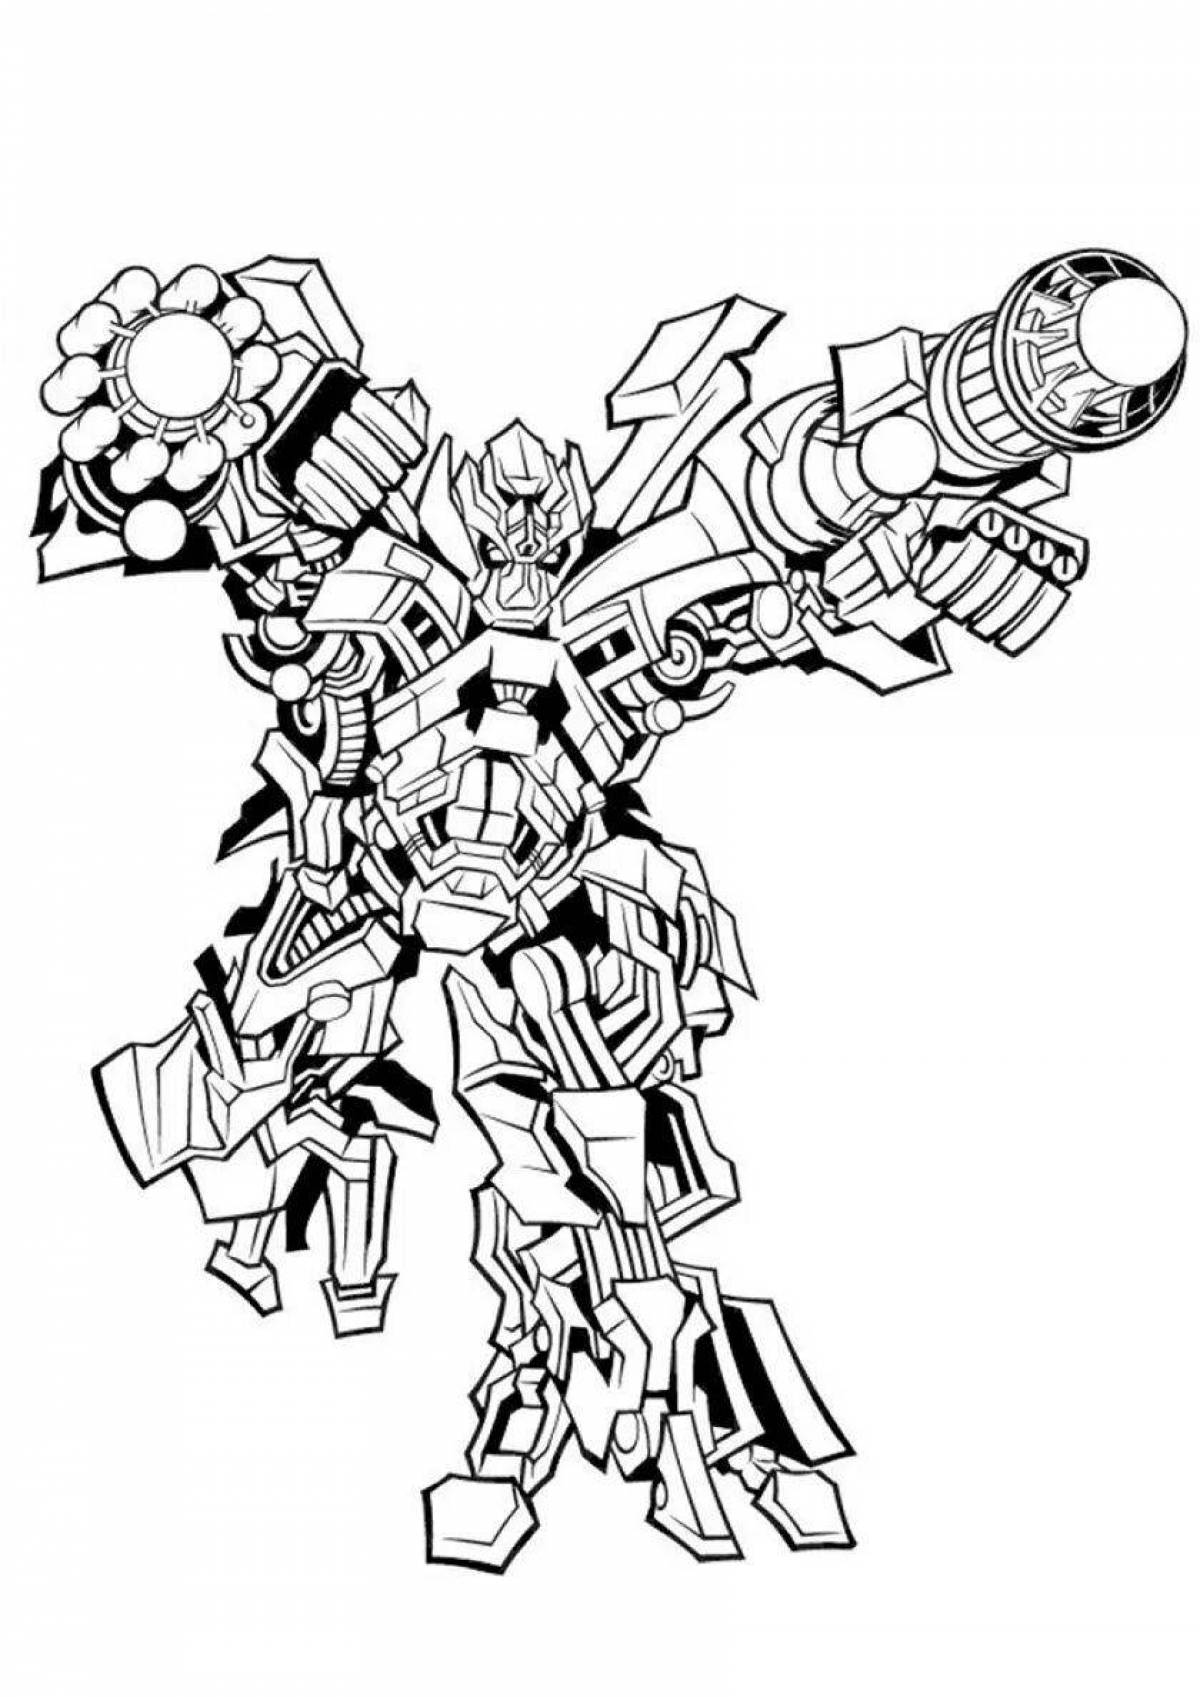 Awesome ravager coloring page